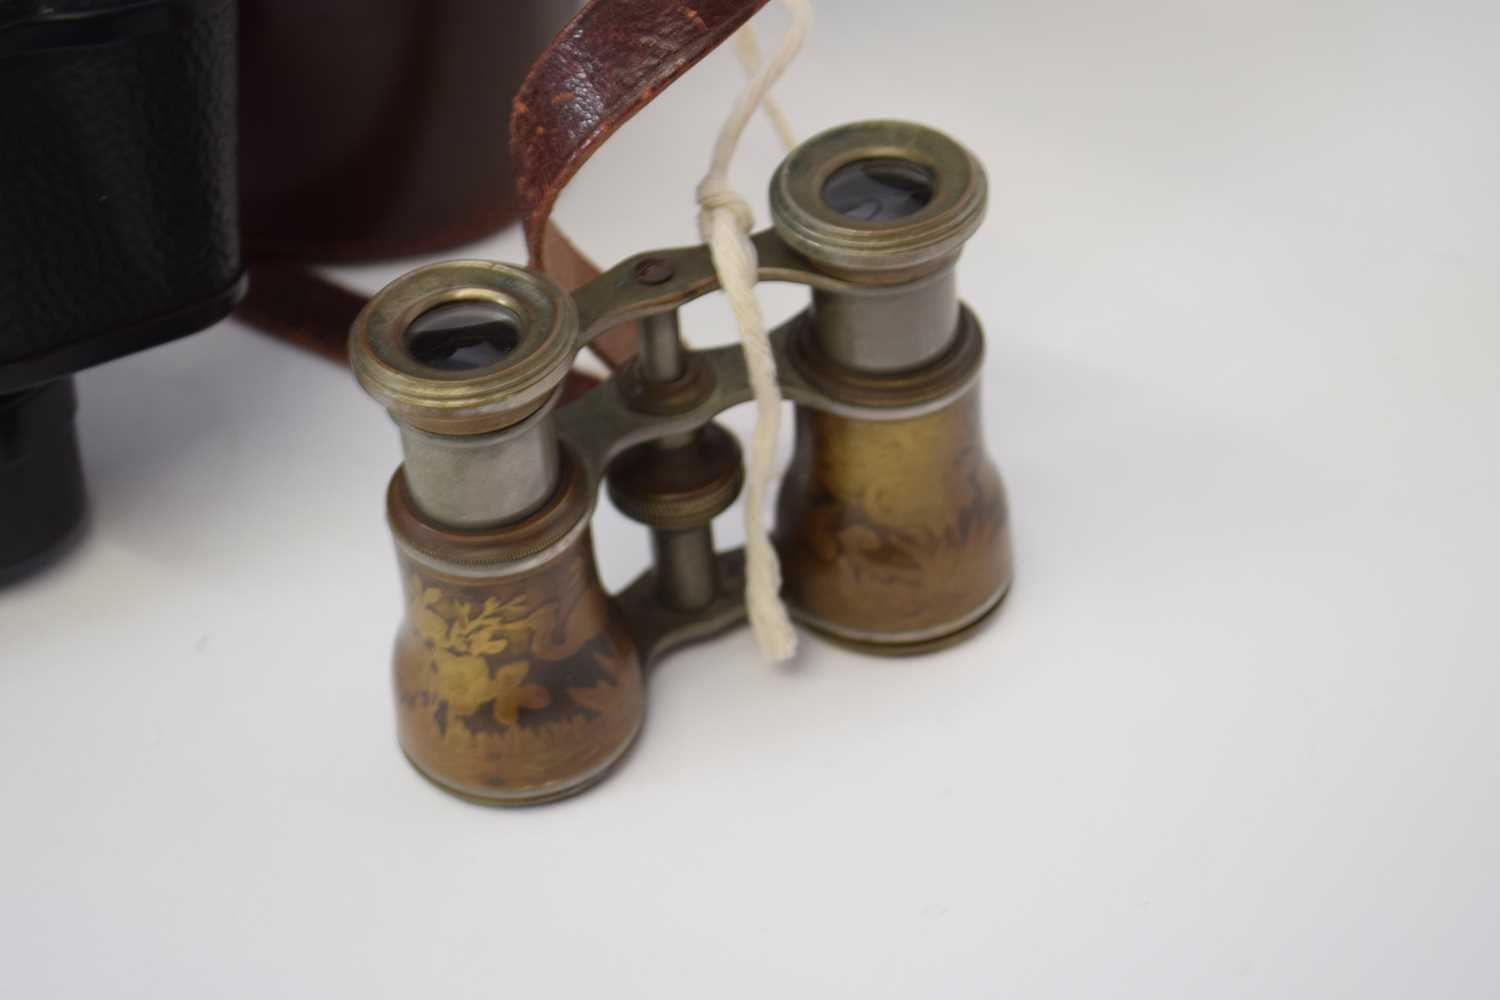 Pair of binoculars made by Ross, London in leather case, together with a small pair of opera glasses - Image 4 of 4